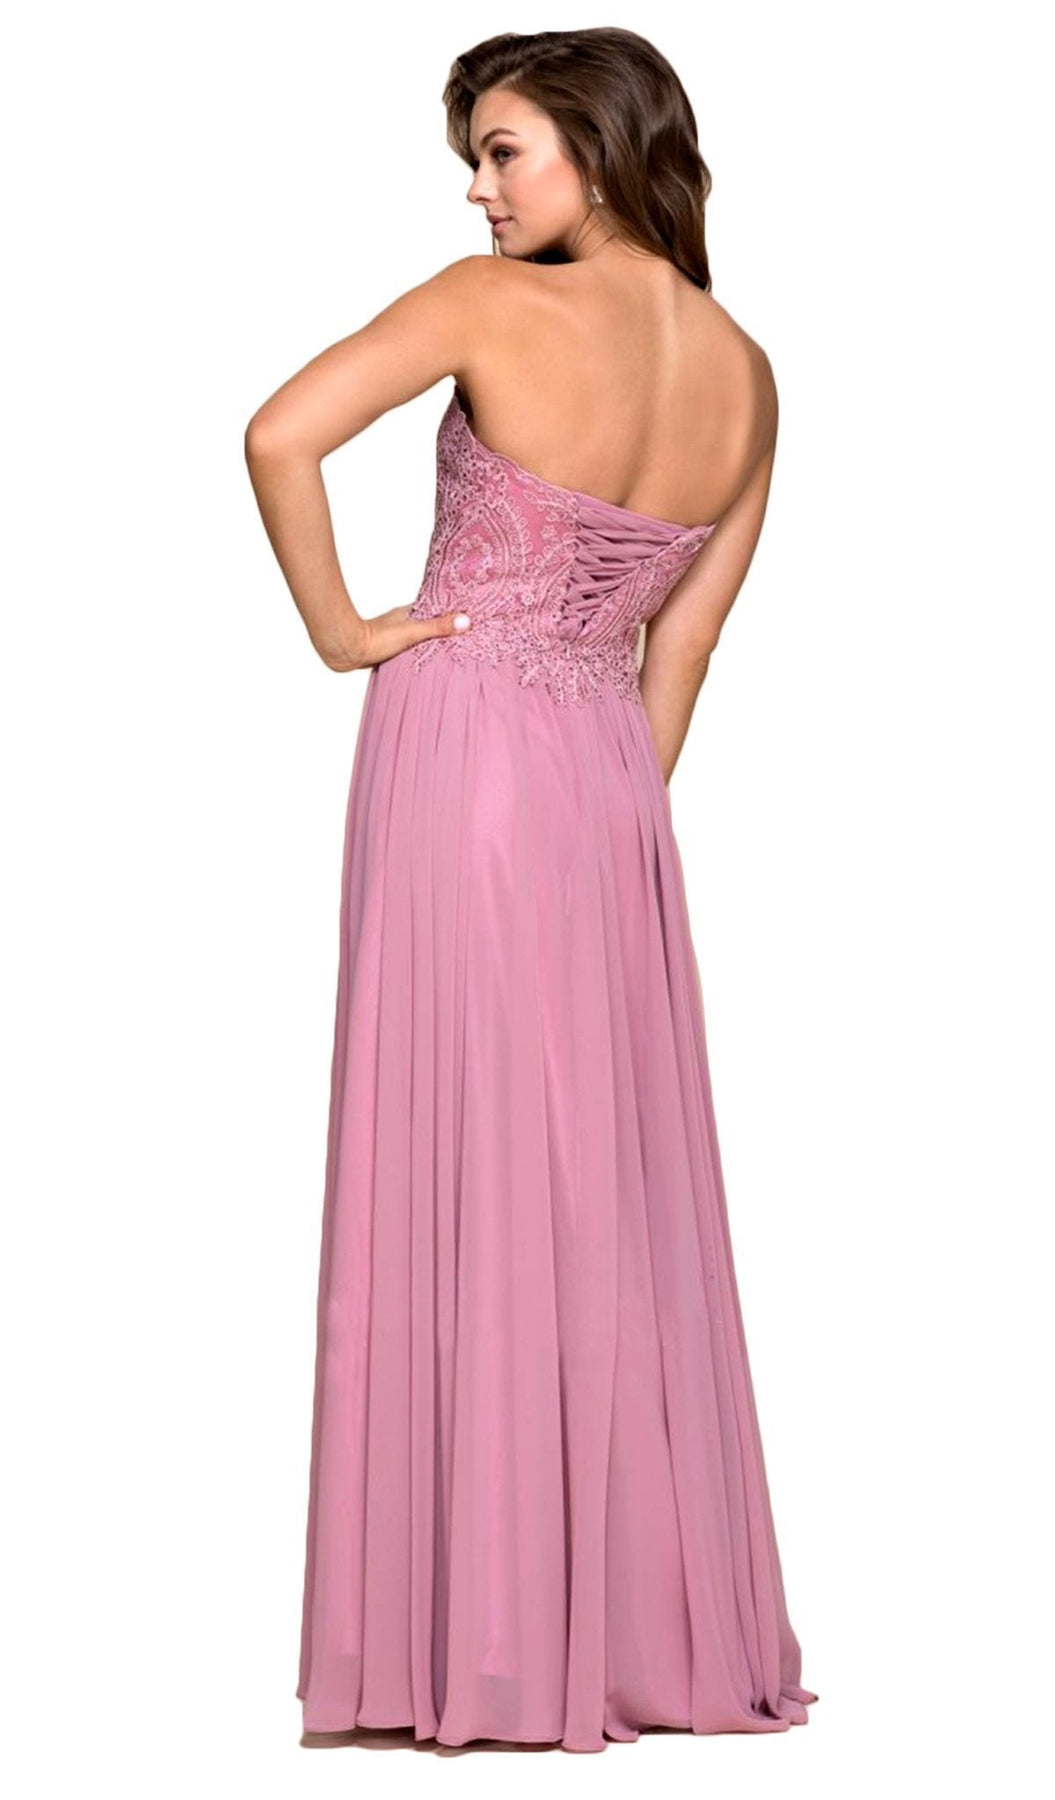 Nox Anabel - B045 Strapless Beaded Chiffon A-line Dress Special Occasion Dress